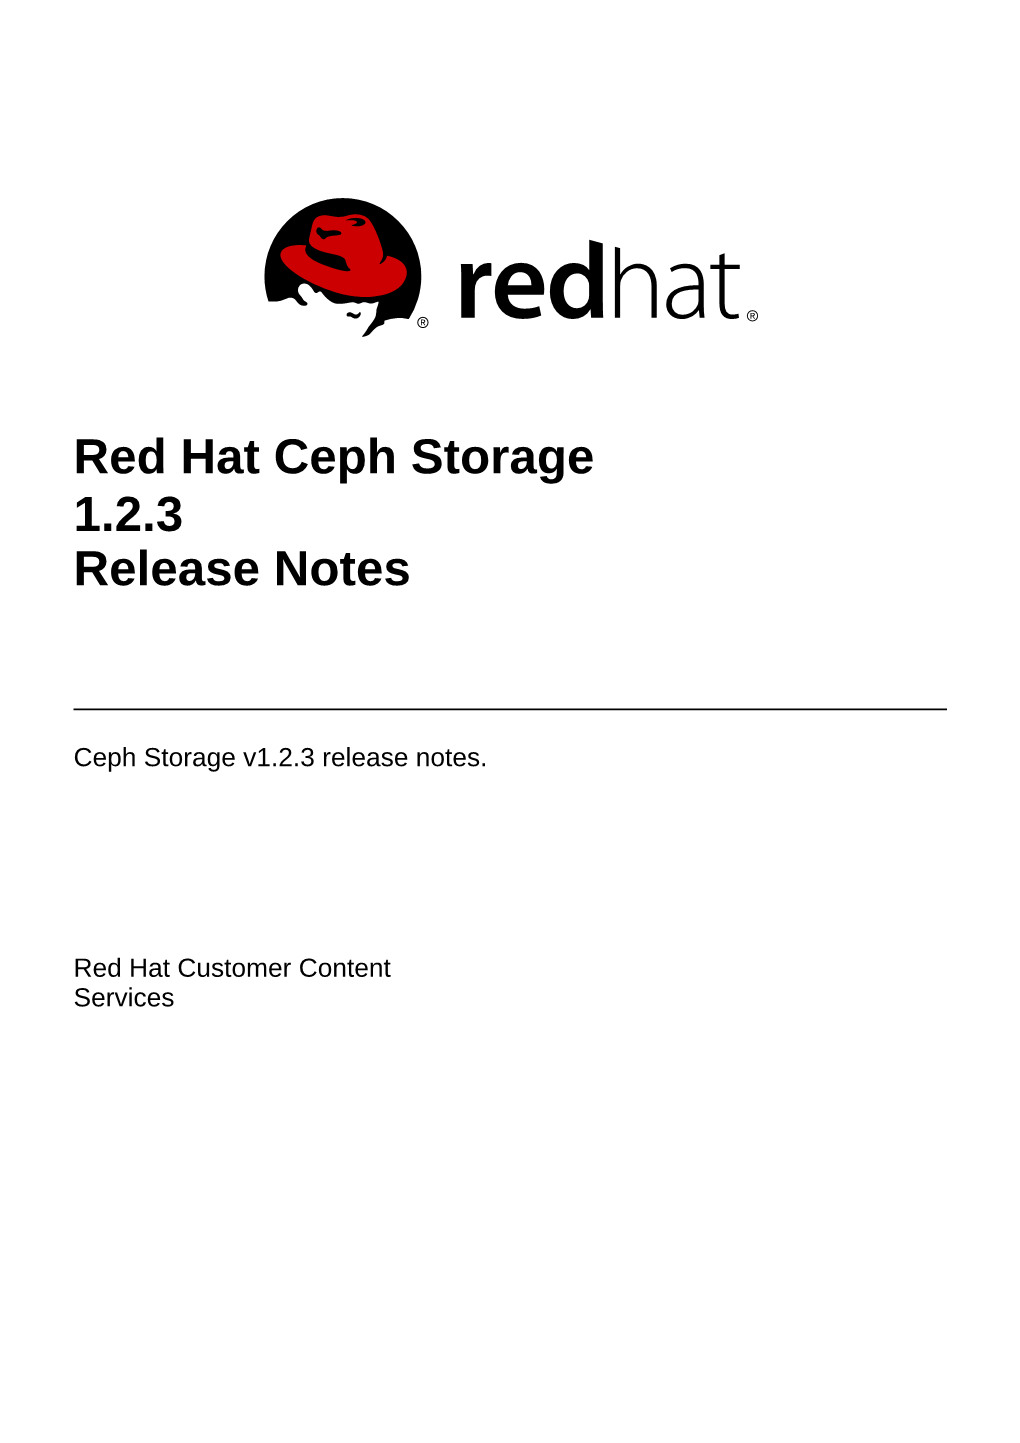 Red Hat Ceph Storage 1.2.3 Release Notes